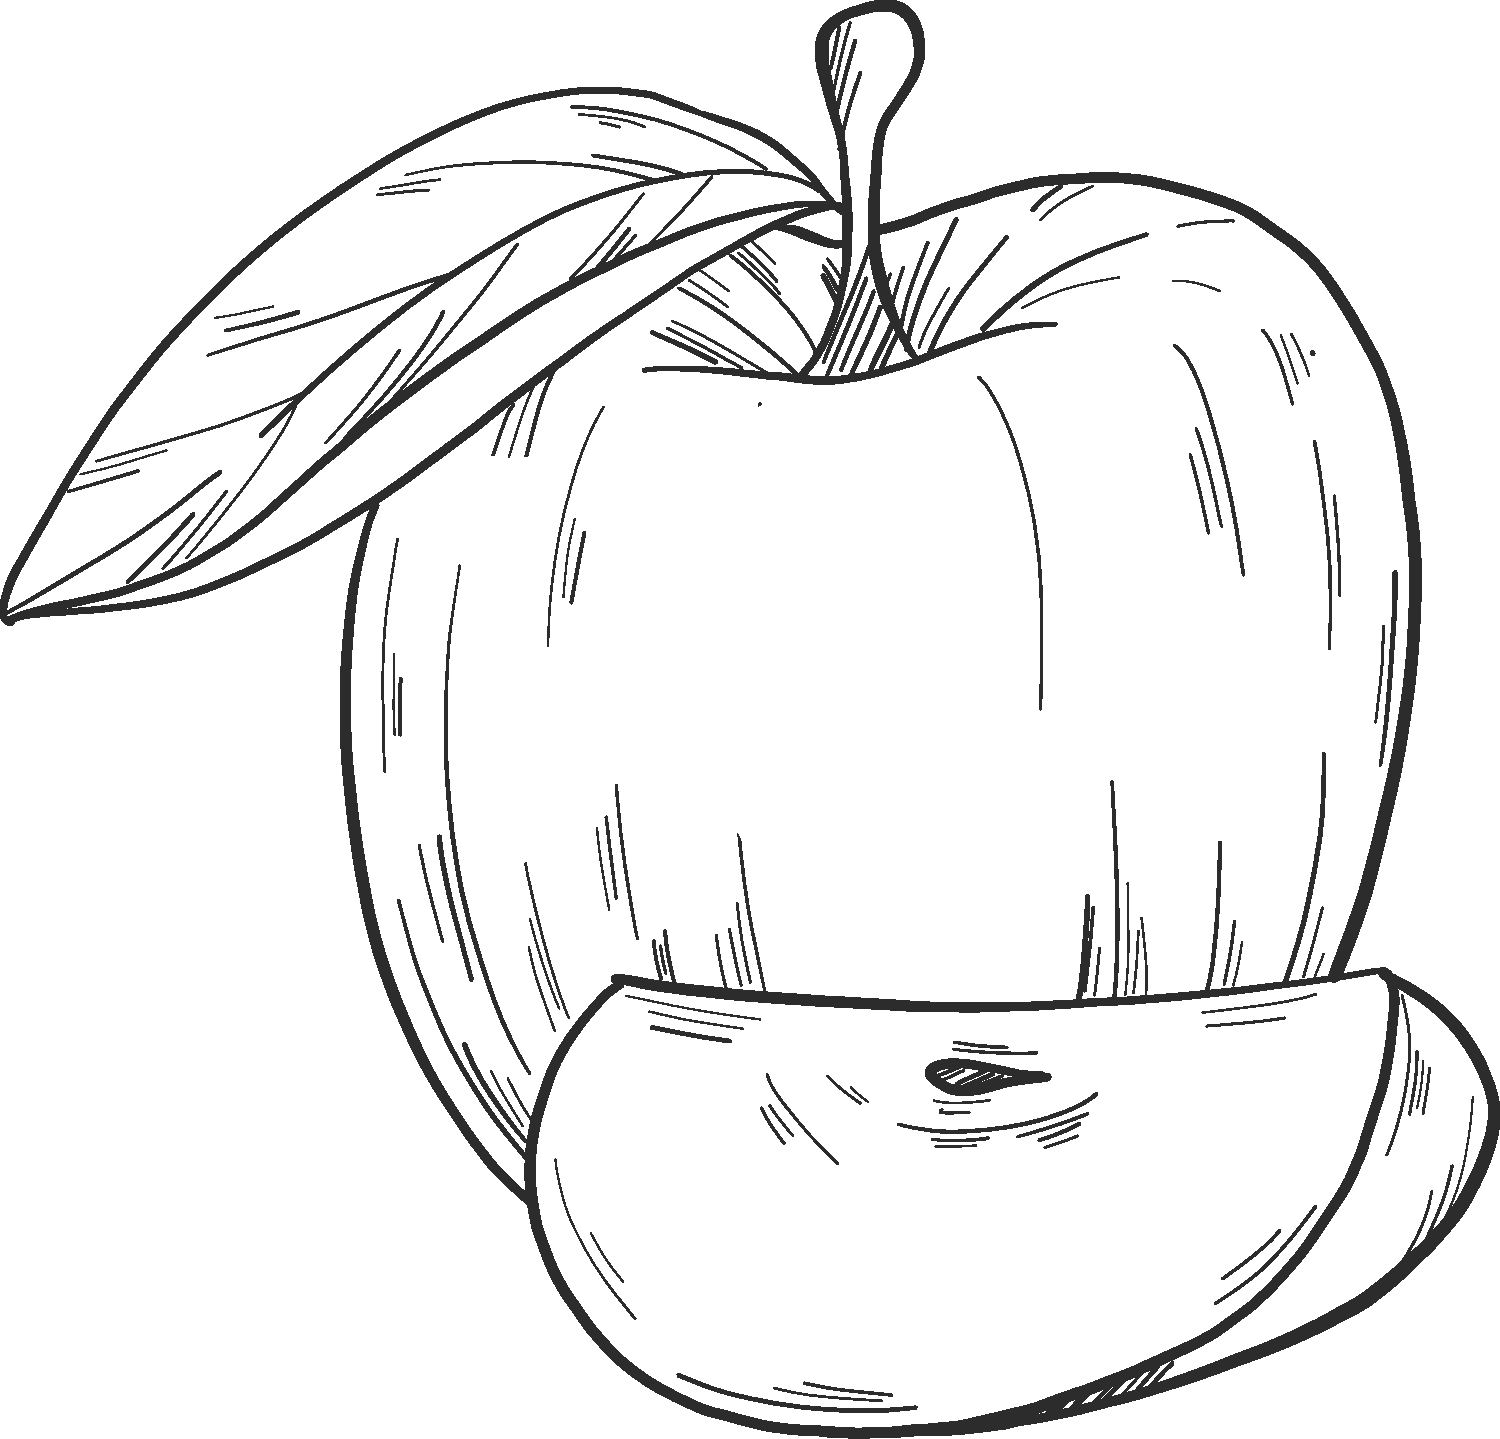 Drawing 02 of apples to color